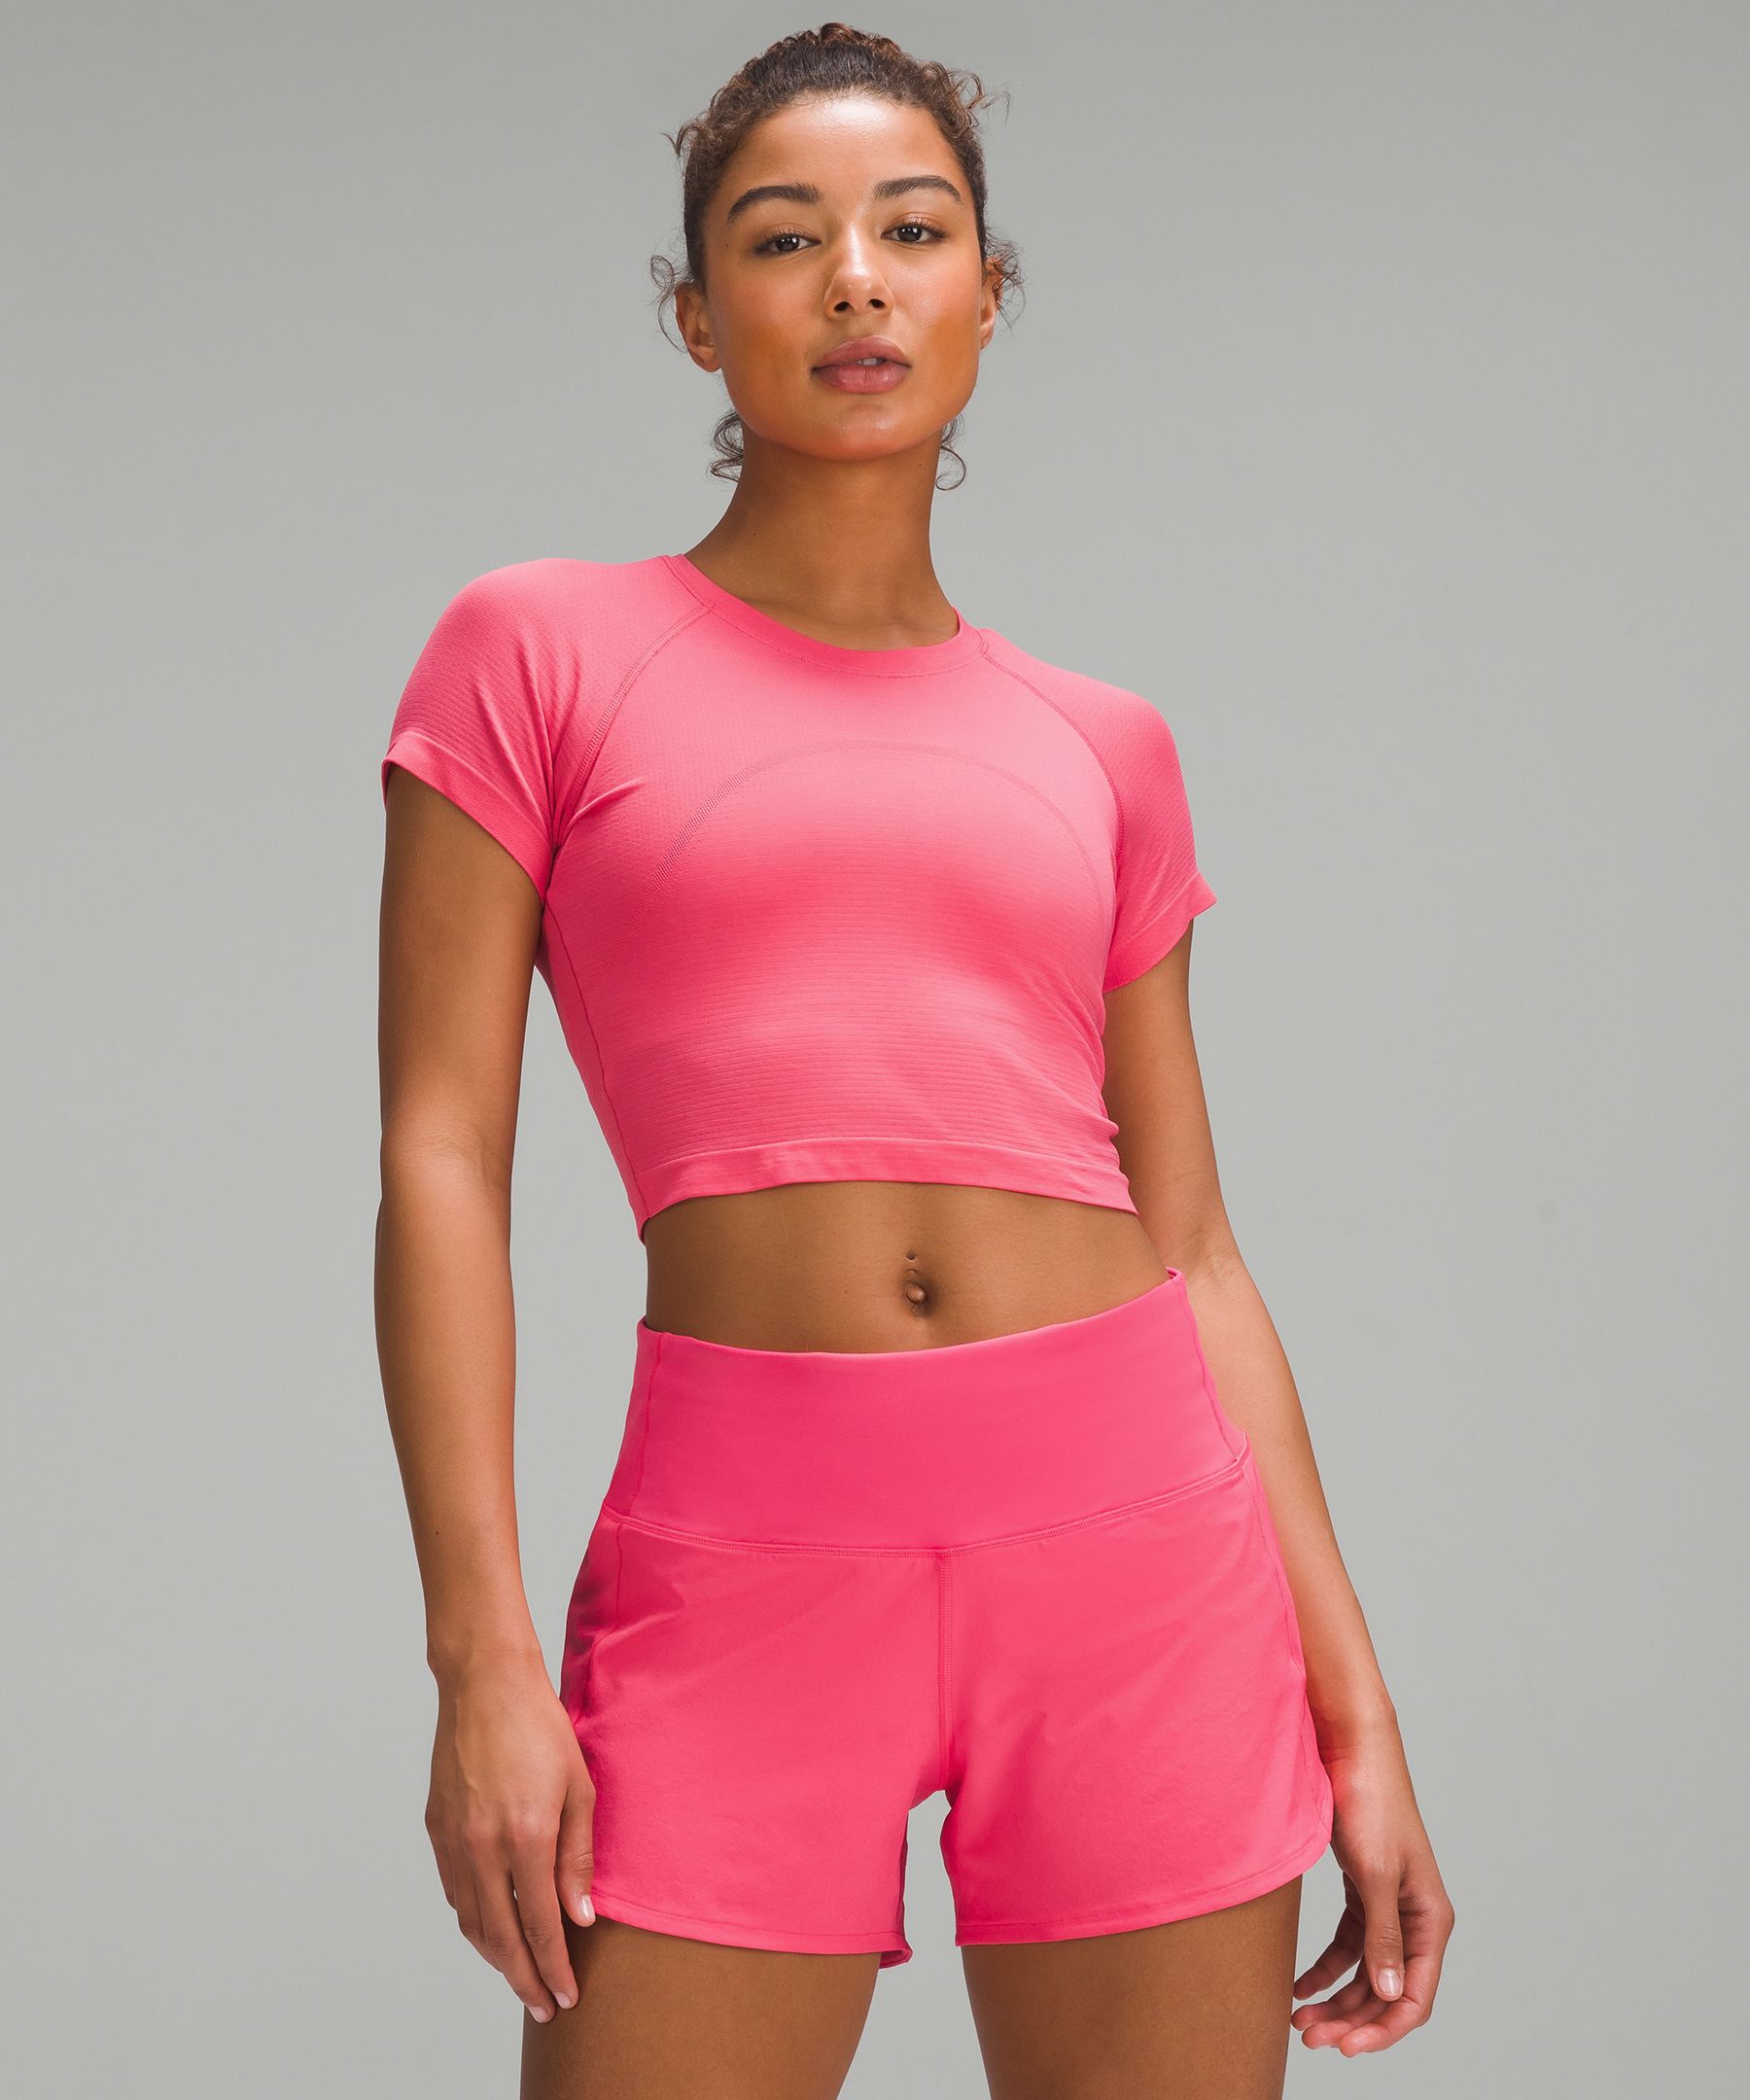 Lu's Chic Women's Crop Tops with Built-in Bra Short Sleeve Workout Shirt  Sports Fitness Active Yoga Athletic Crew Neck Padded Hollow Out Tight Tee  Gym Pink Small 